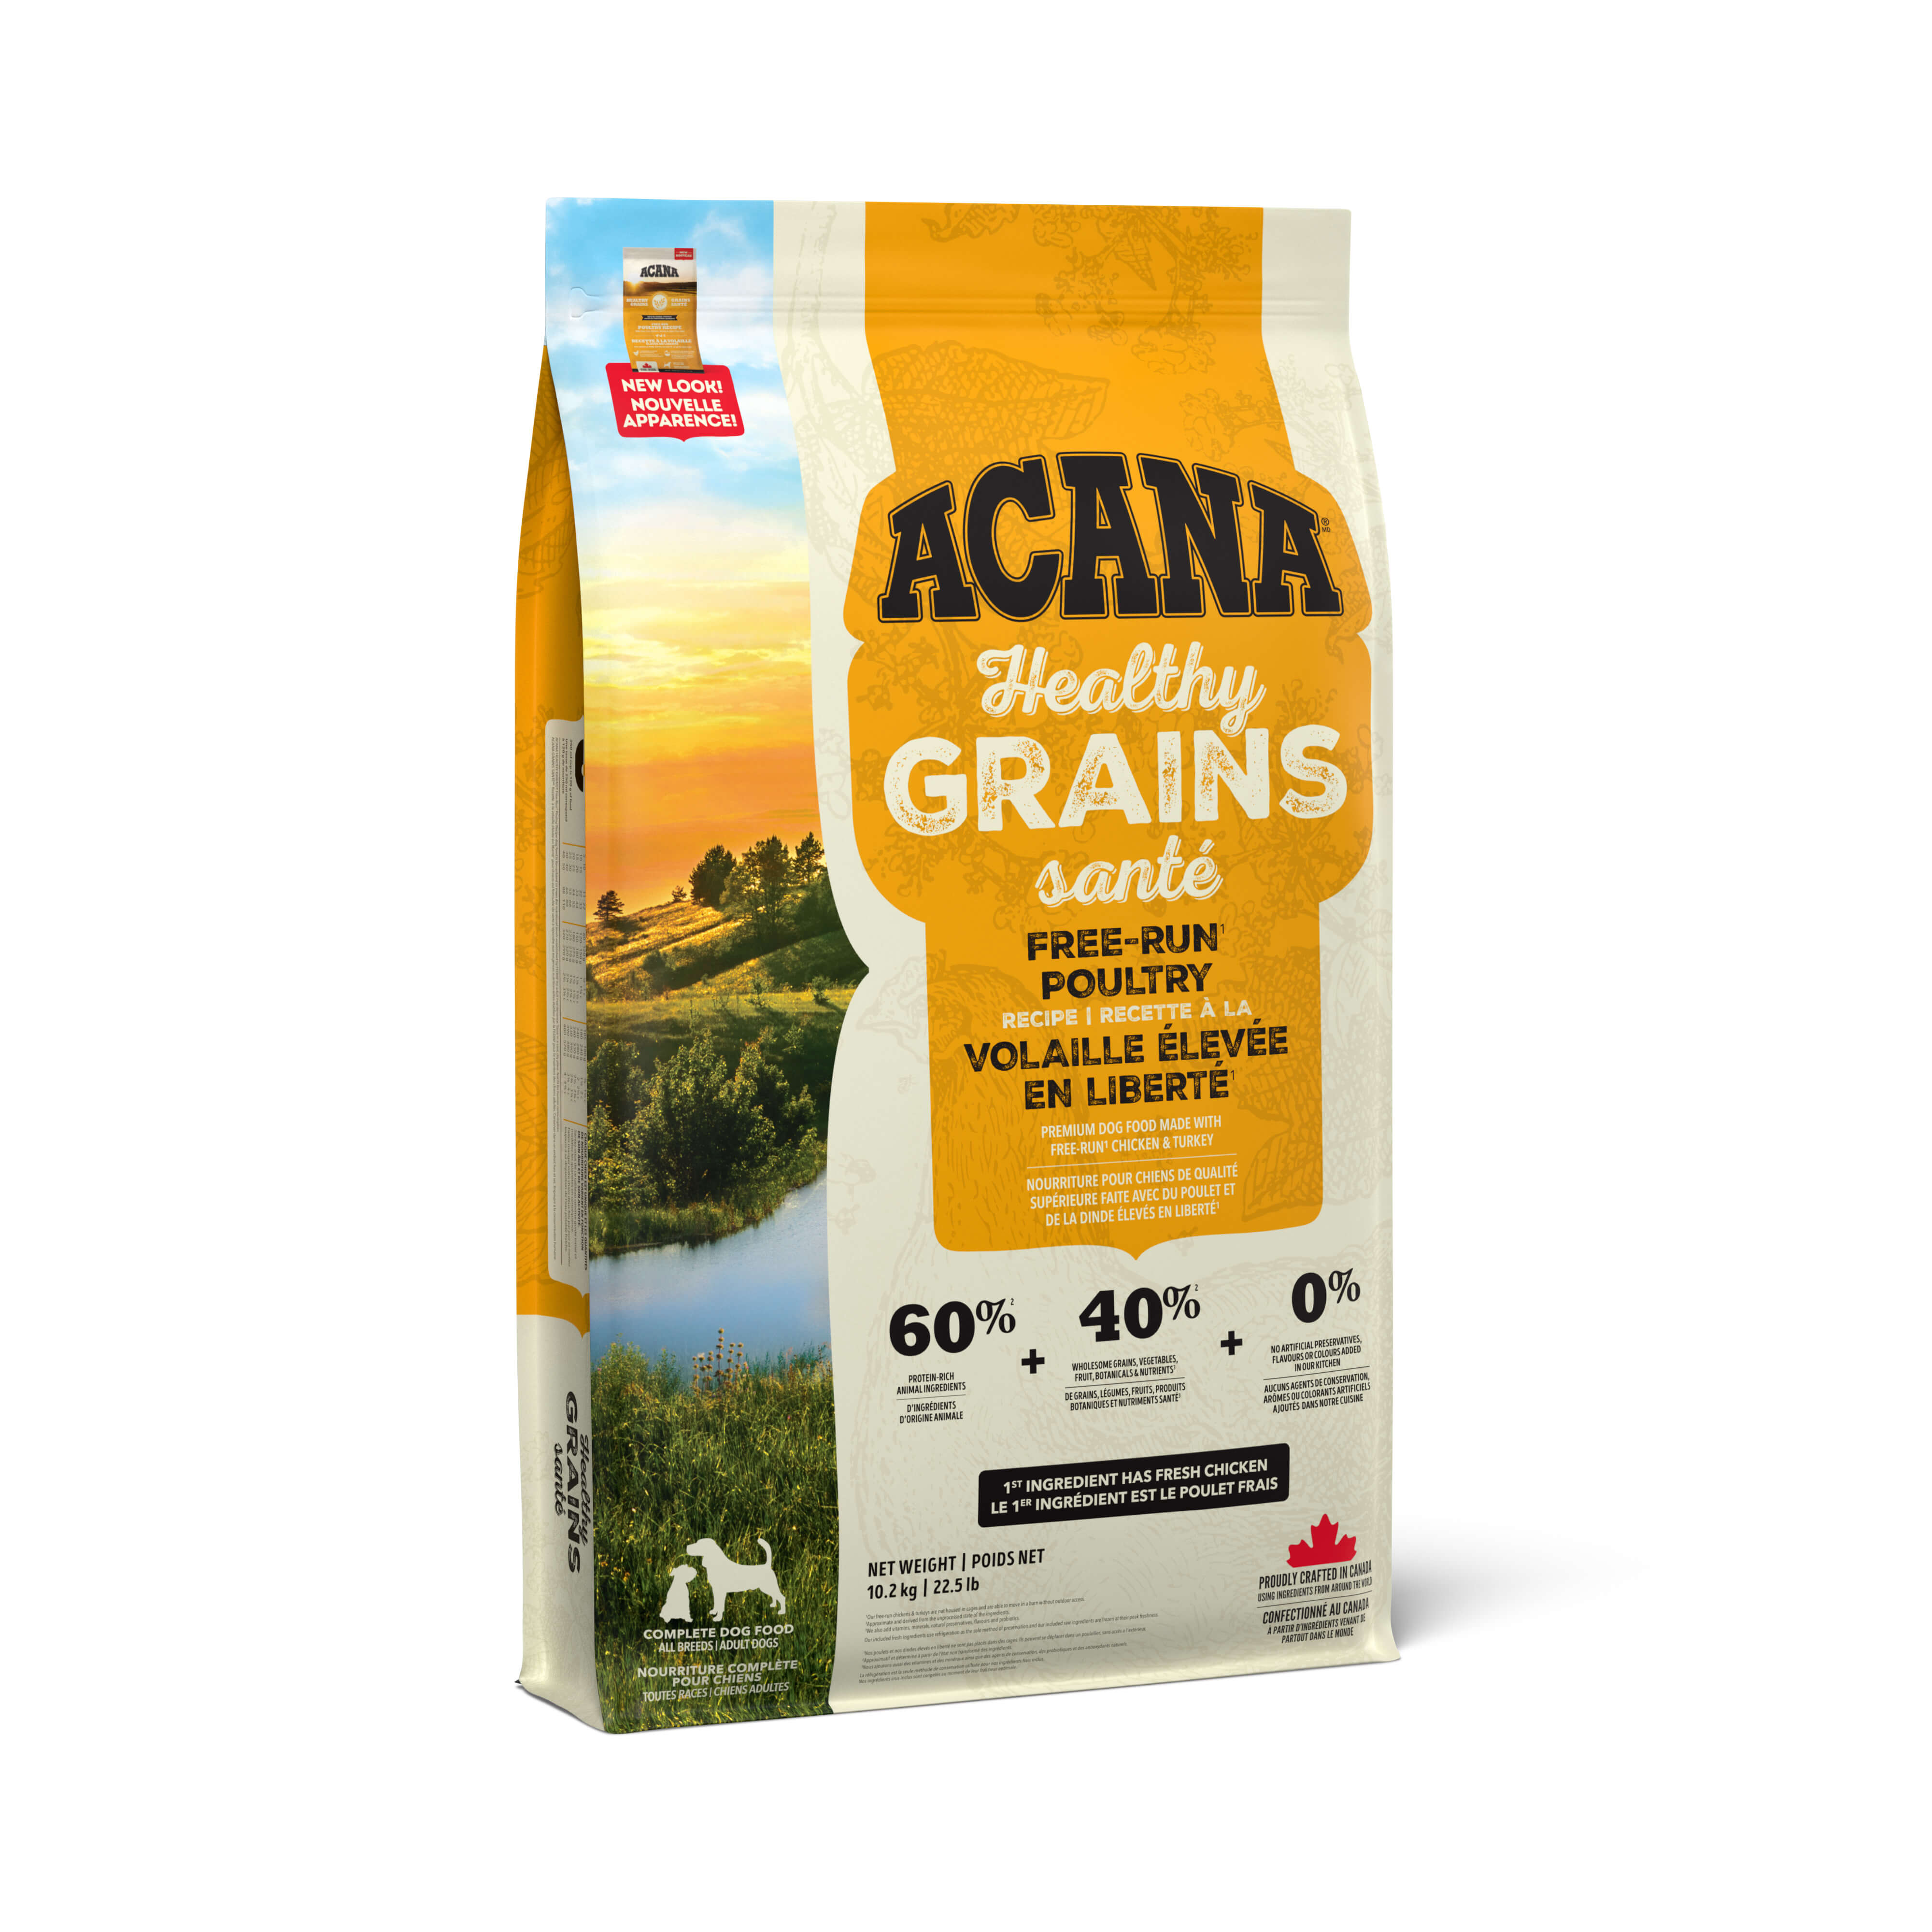 Acana - Healthy Grains - Free-Run Poultry (Dry Dog Food)